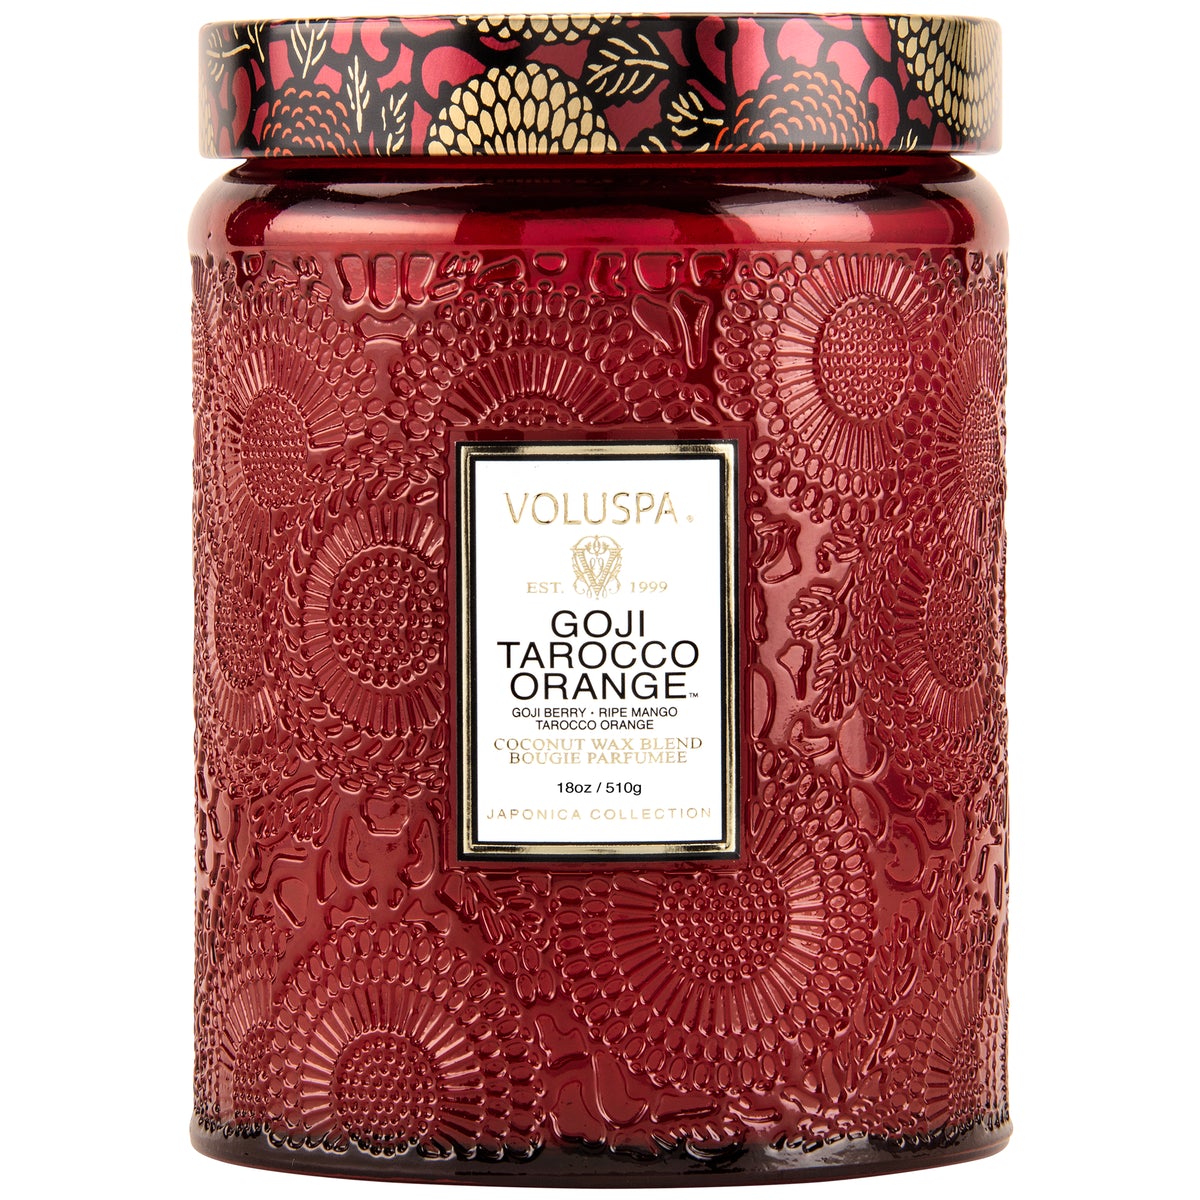 GOJI TAROCCO ORANGE JAR CANDLE - Hair With A Cause   Oncology Boutique     